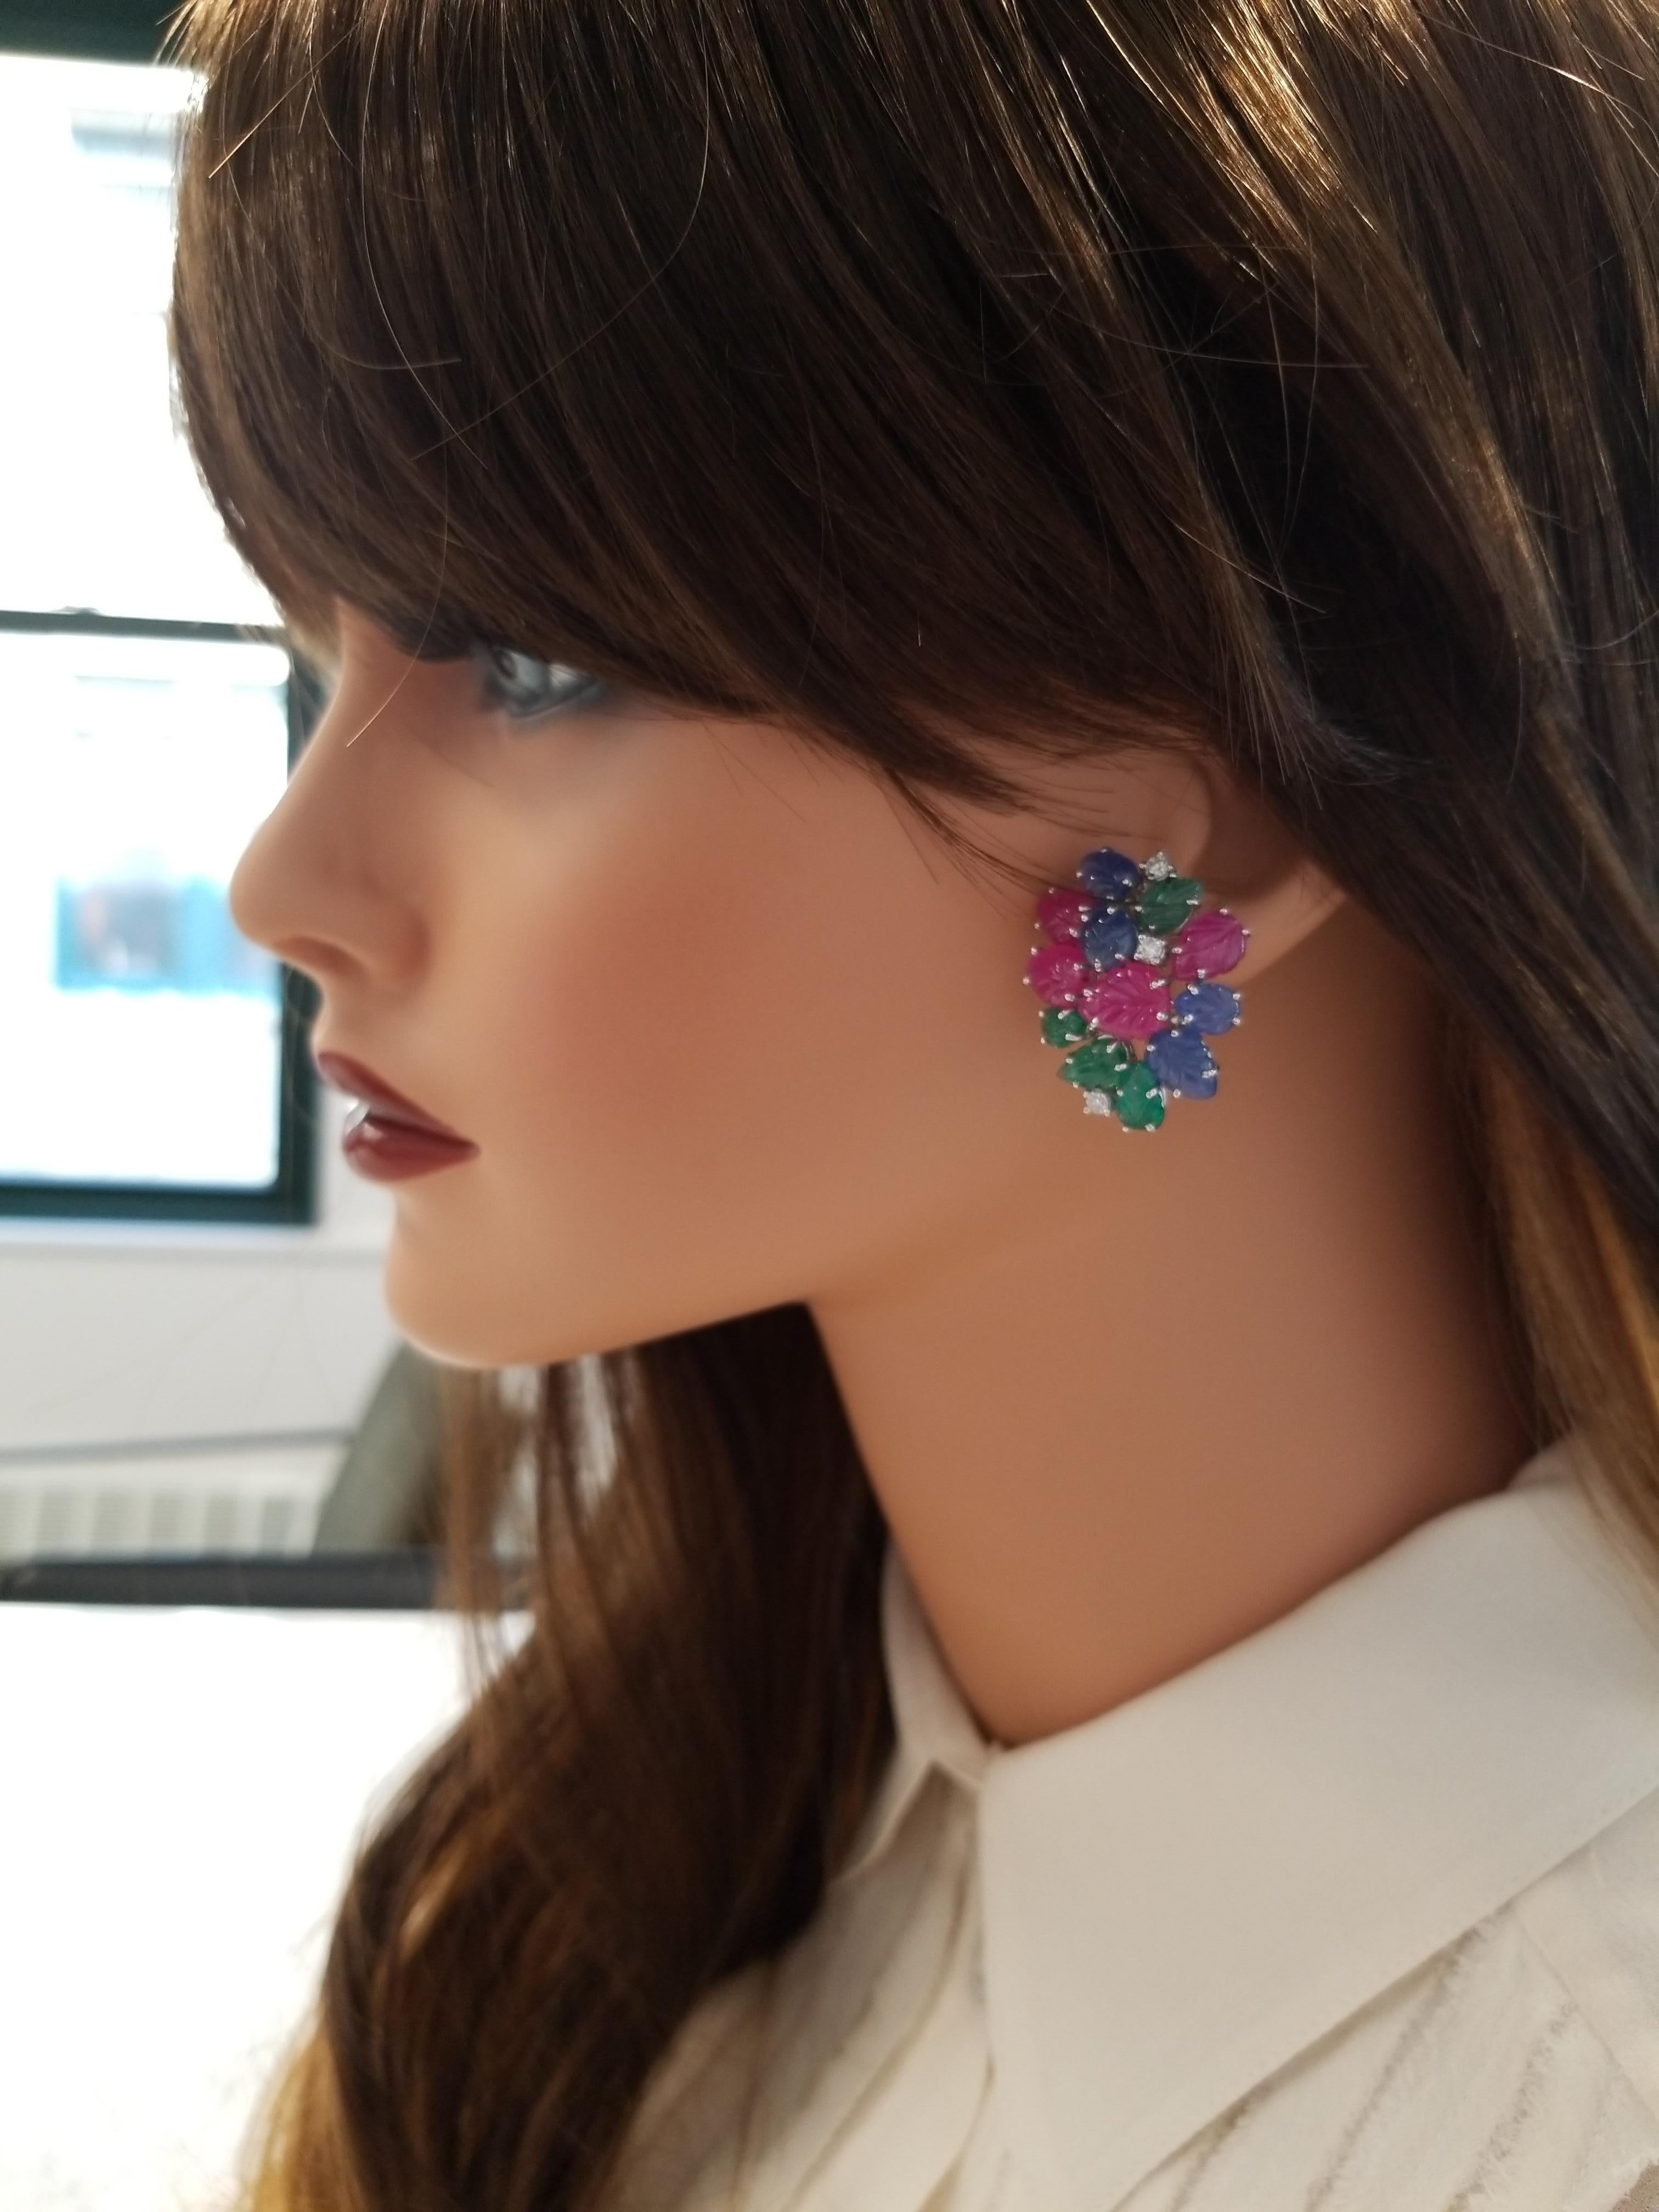 Sapphire, ruby, and emerald gracefully come together to make these gorgeous earrings in handcarved leaf shapes totaling an impressive 36.92 carats of vibrant colors and unique luxury. The skill of handcarving rubies, sapphires, and emeralds is a